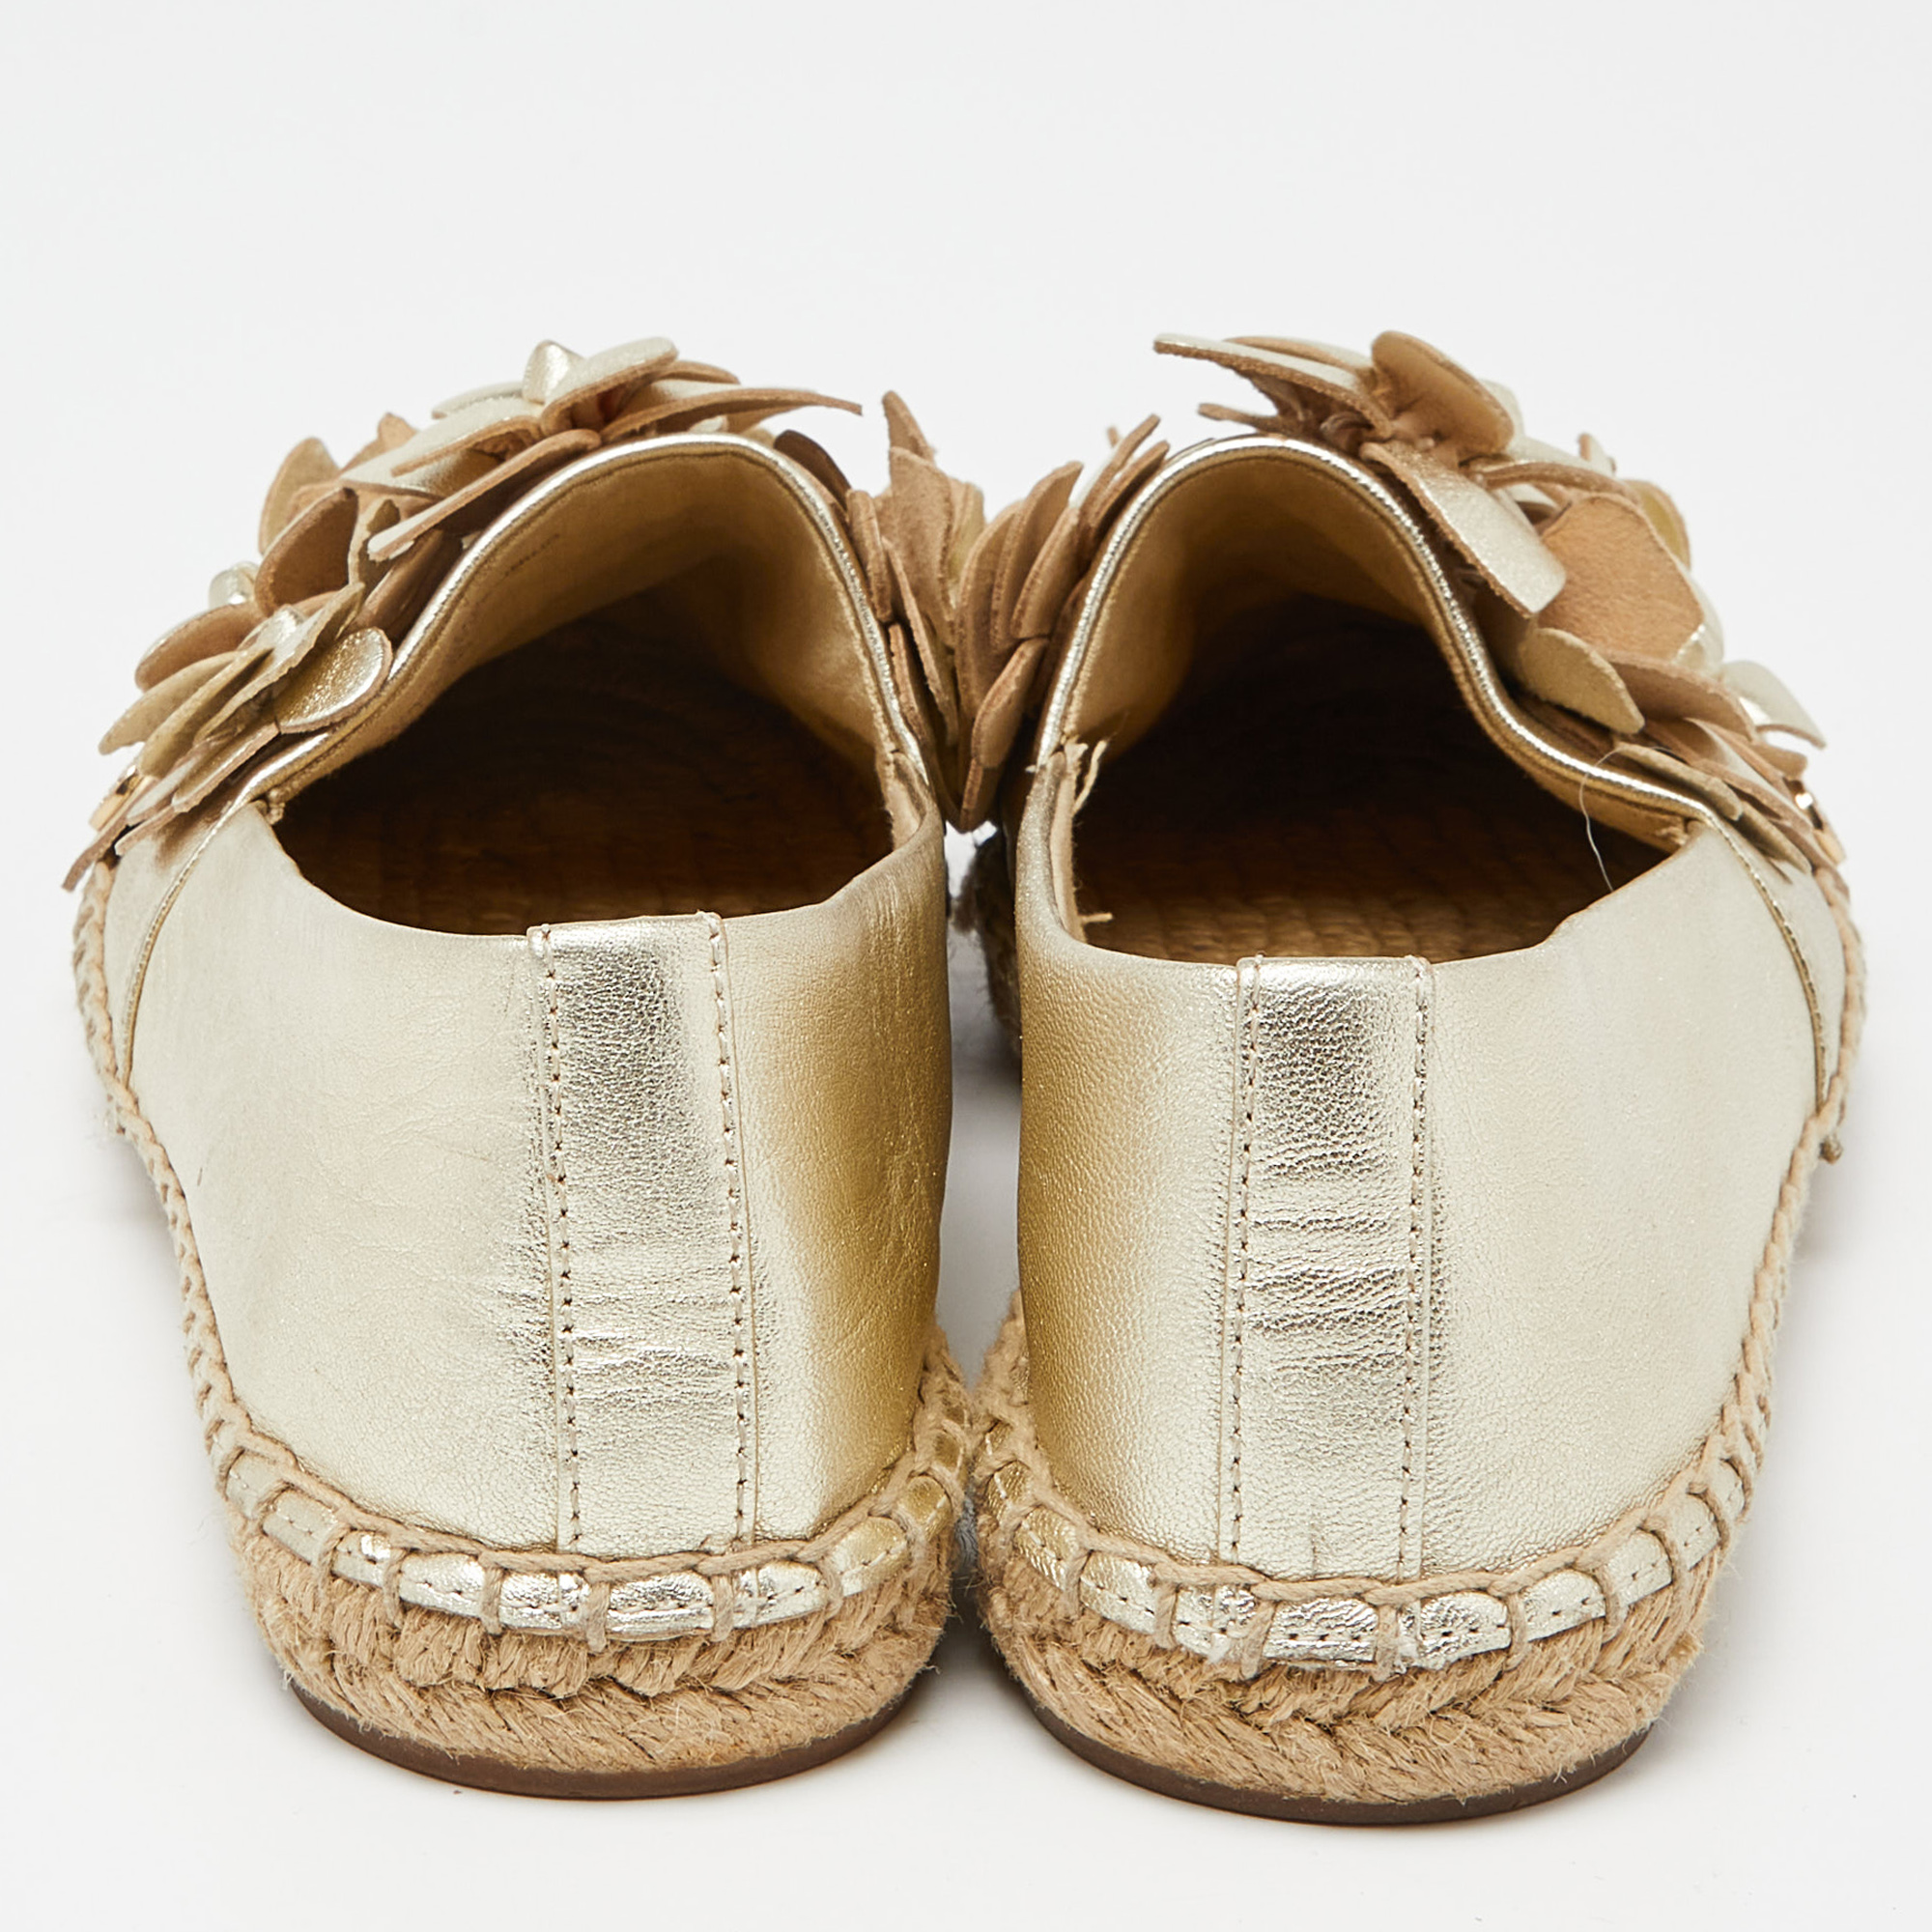 Tory Burch Gold Leather Blossom Espadrille Flats Size 36.5